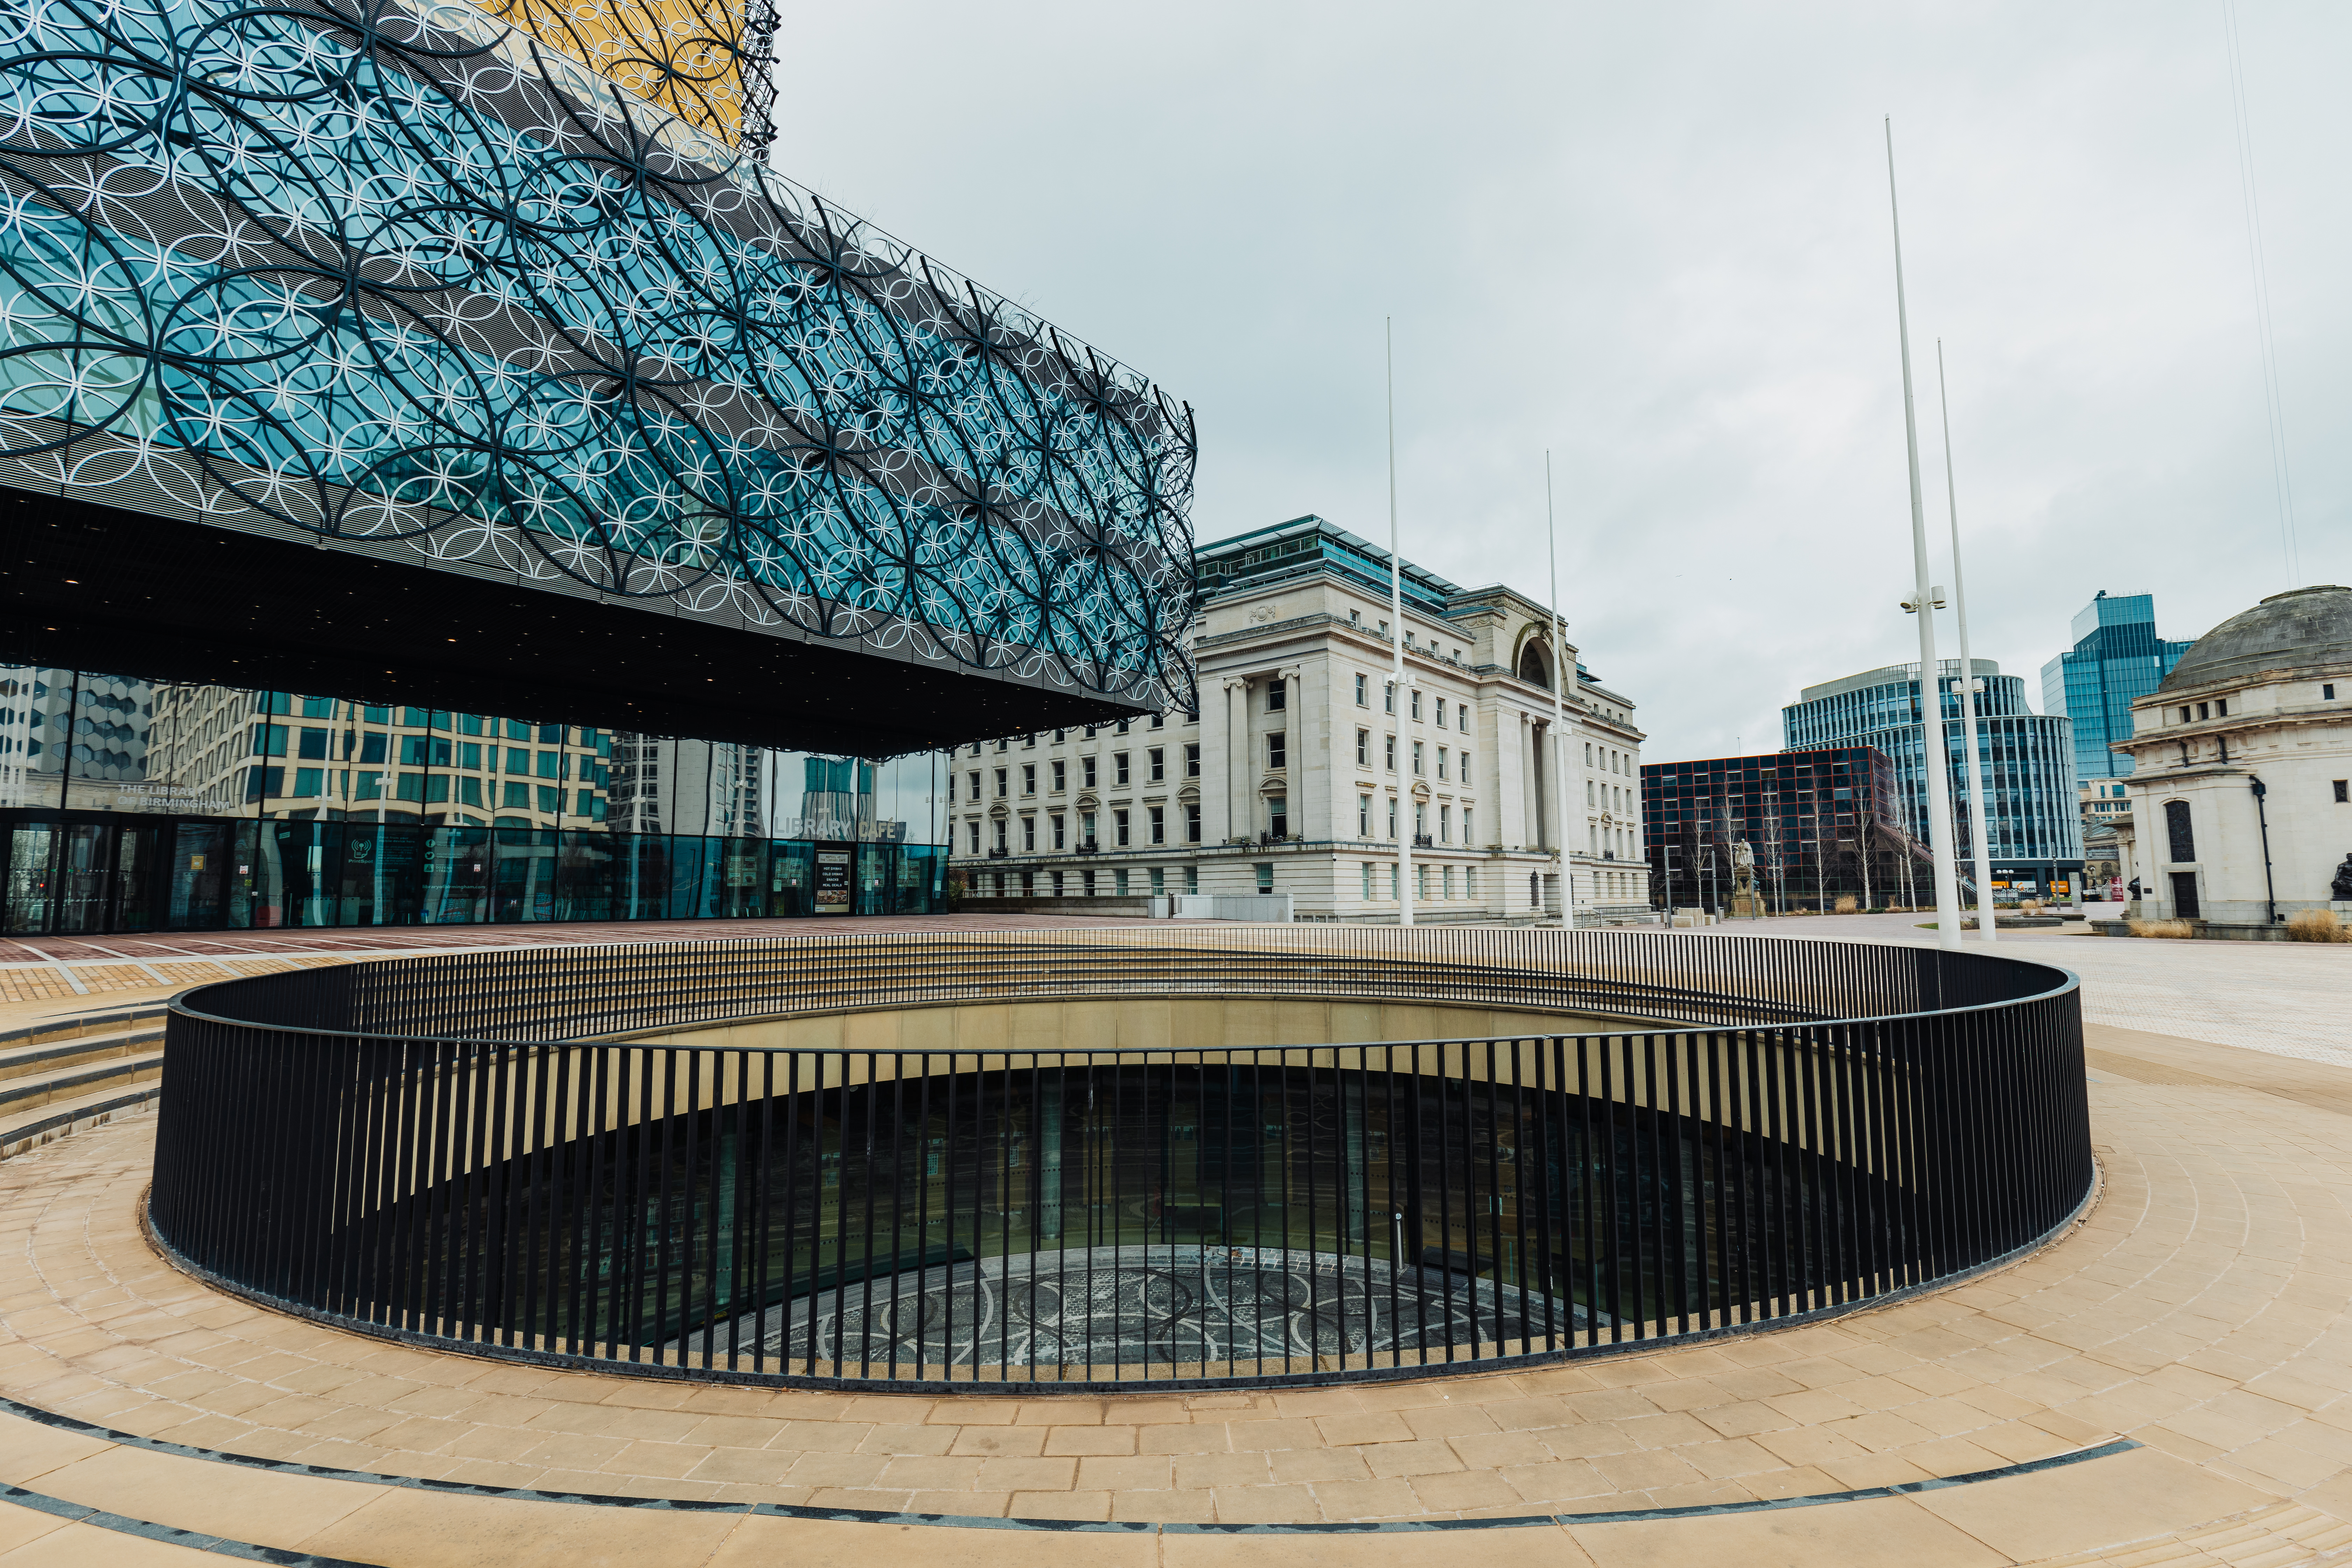 Image shows a public square with the Library of Birmingham to the left and Baskerville House in the distance